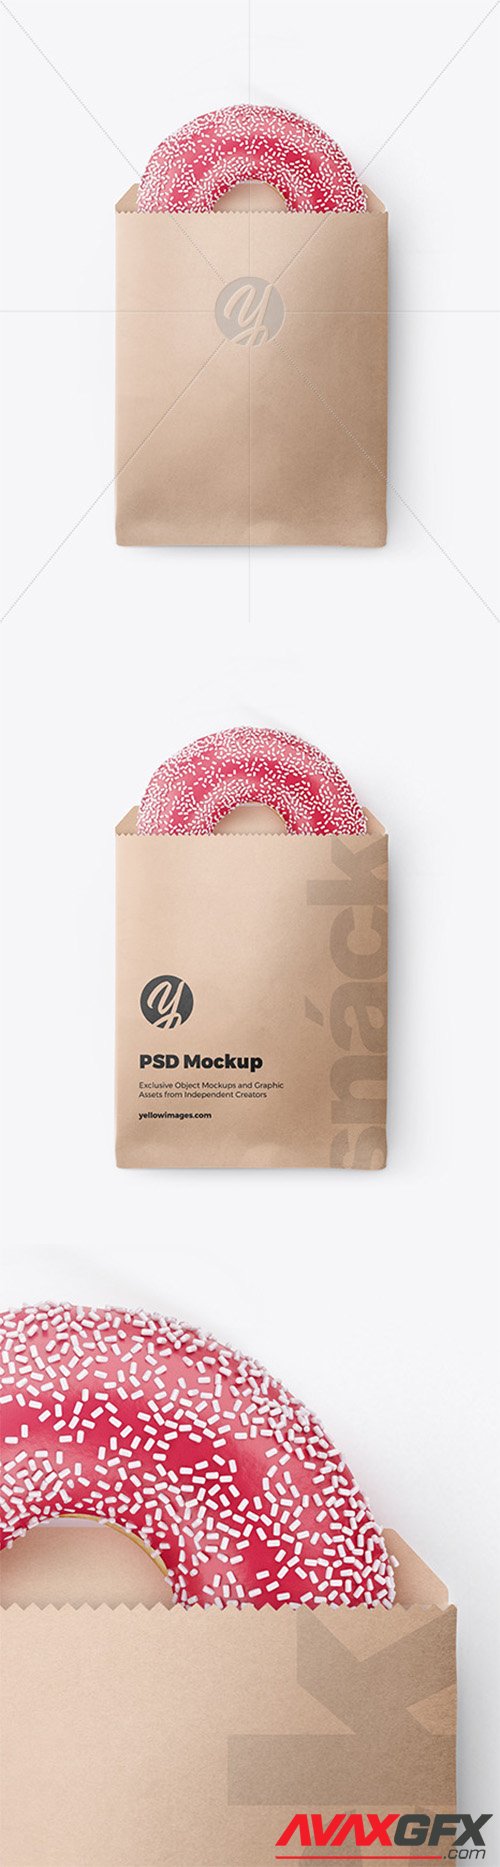 Download Psd Mockups Two Kraft Pillow Boxes Psd Yellowimages Mockups